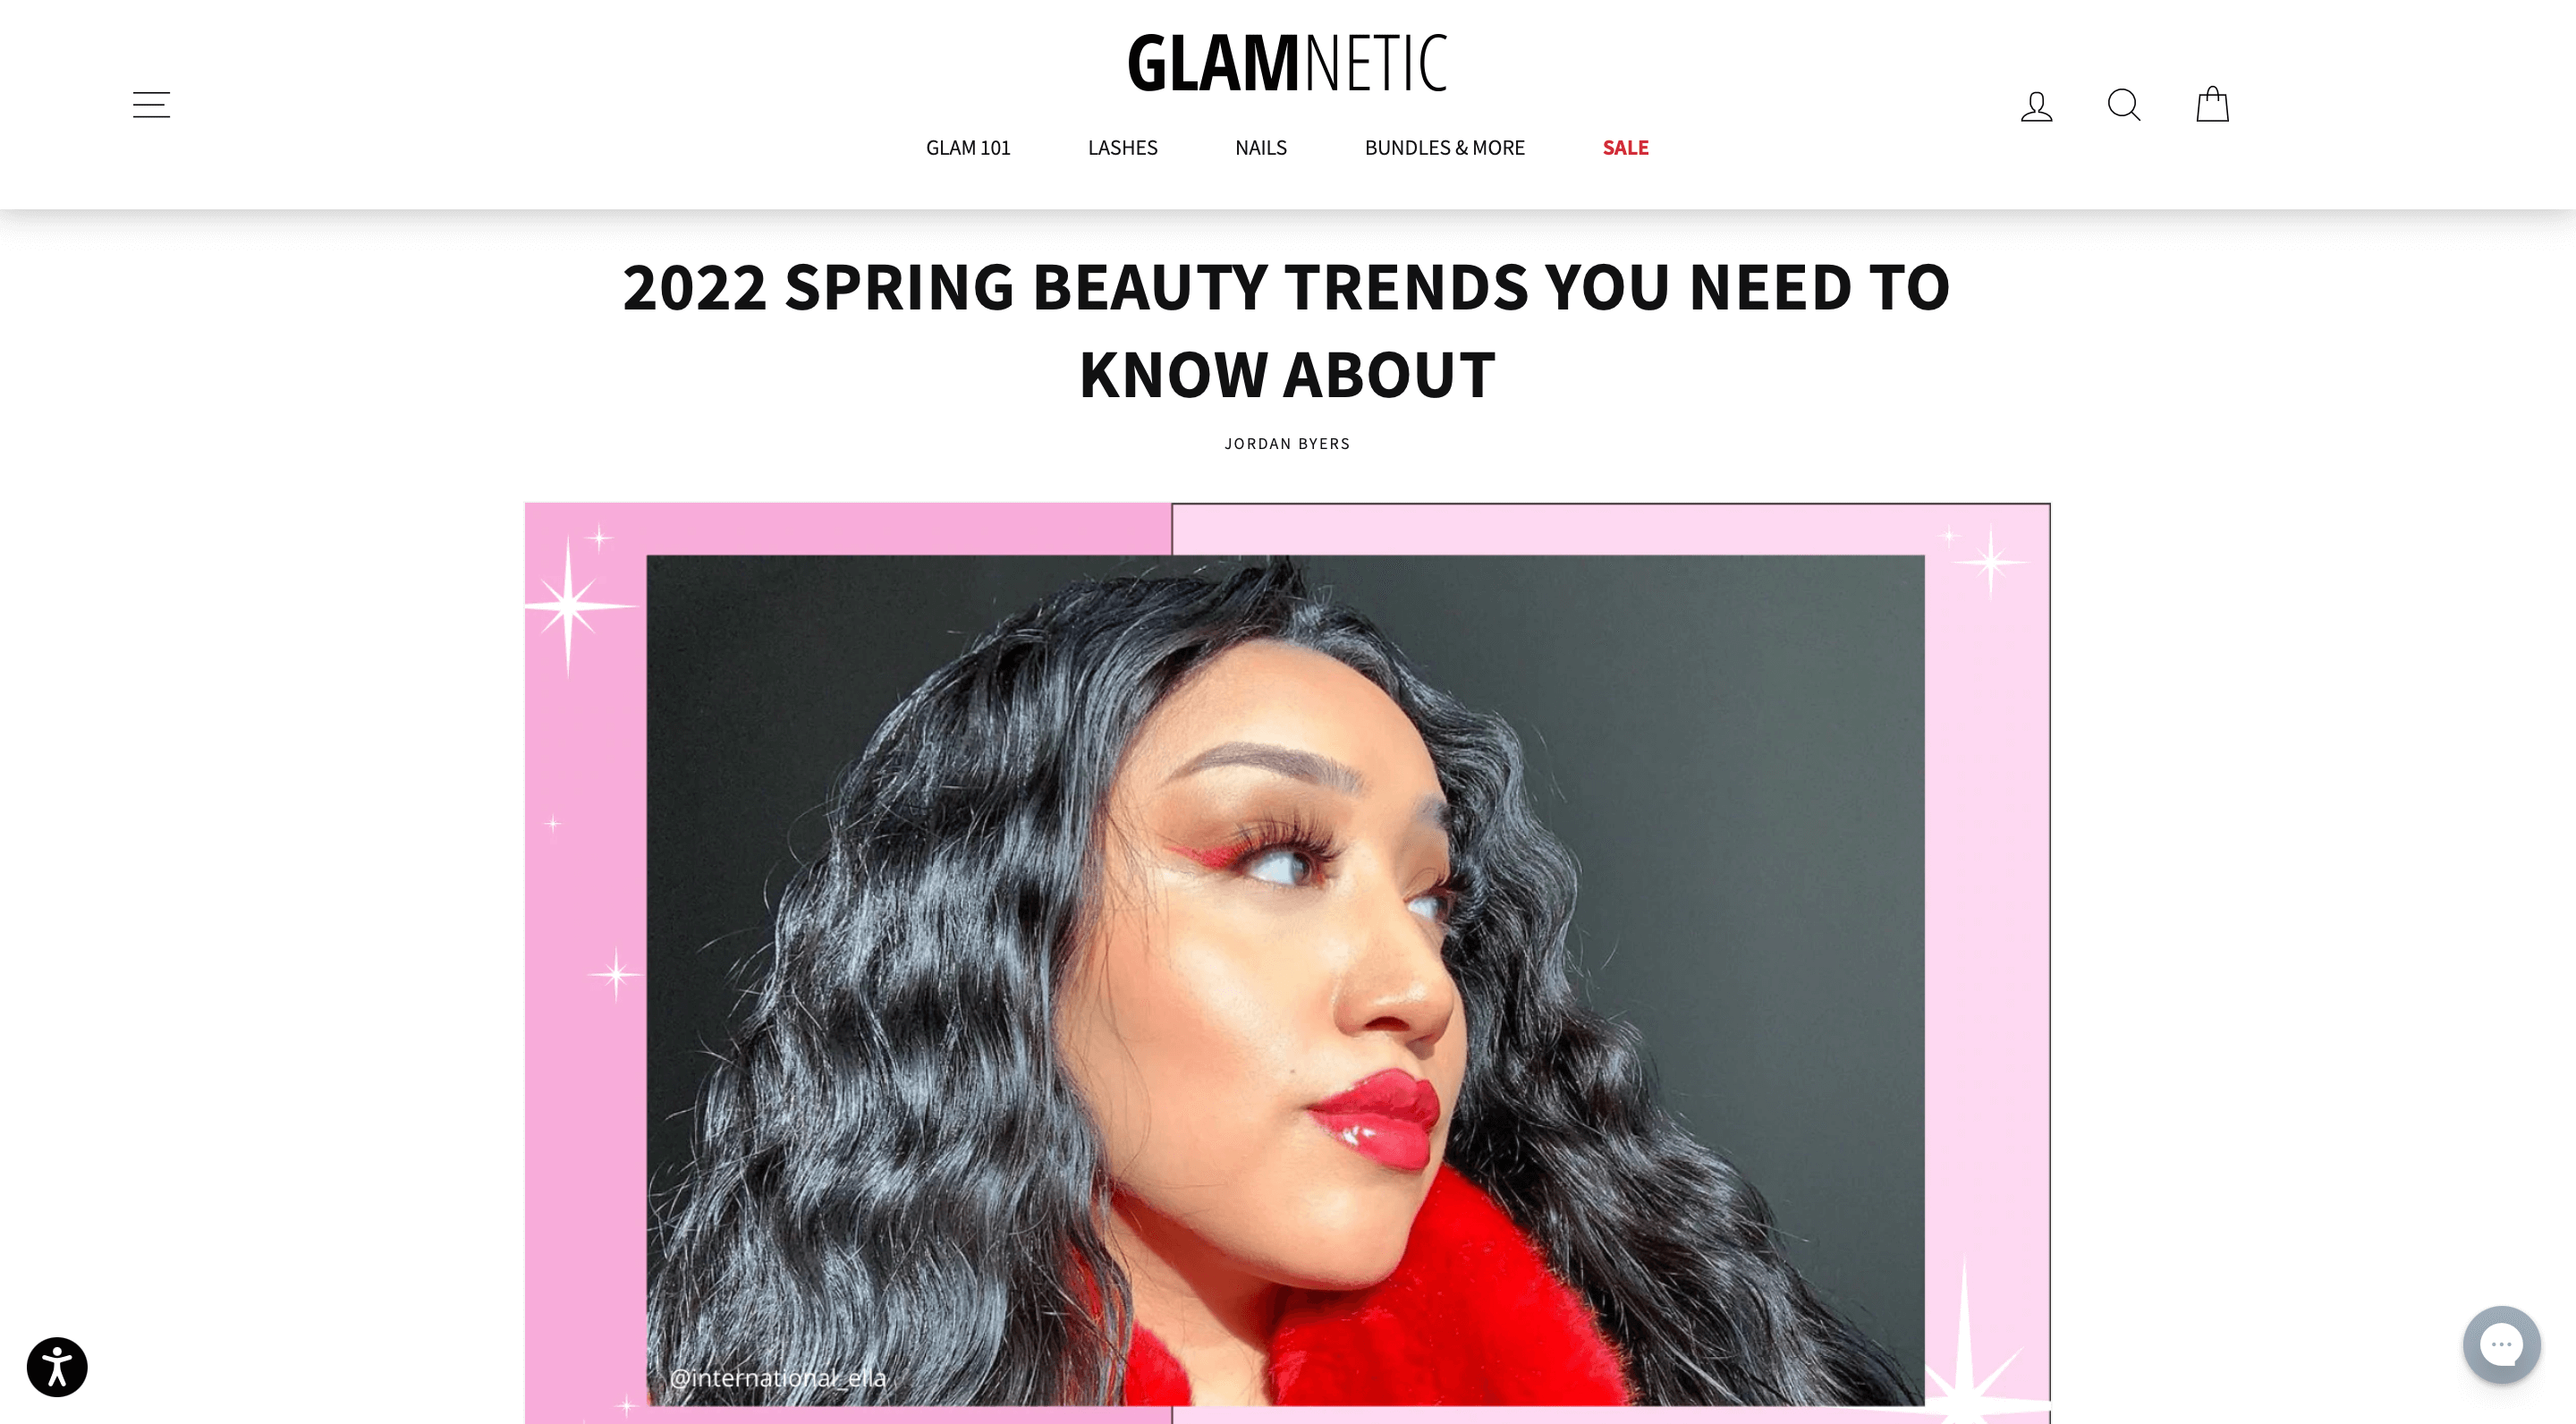 A blog post from Glamnetic